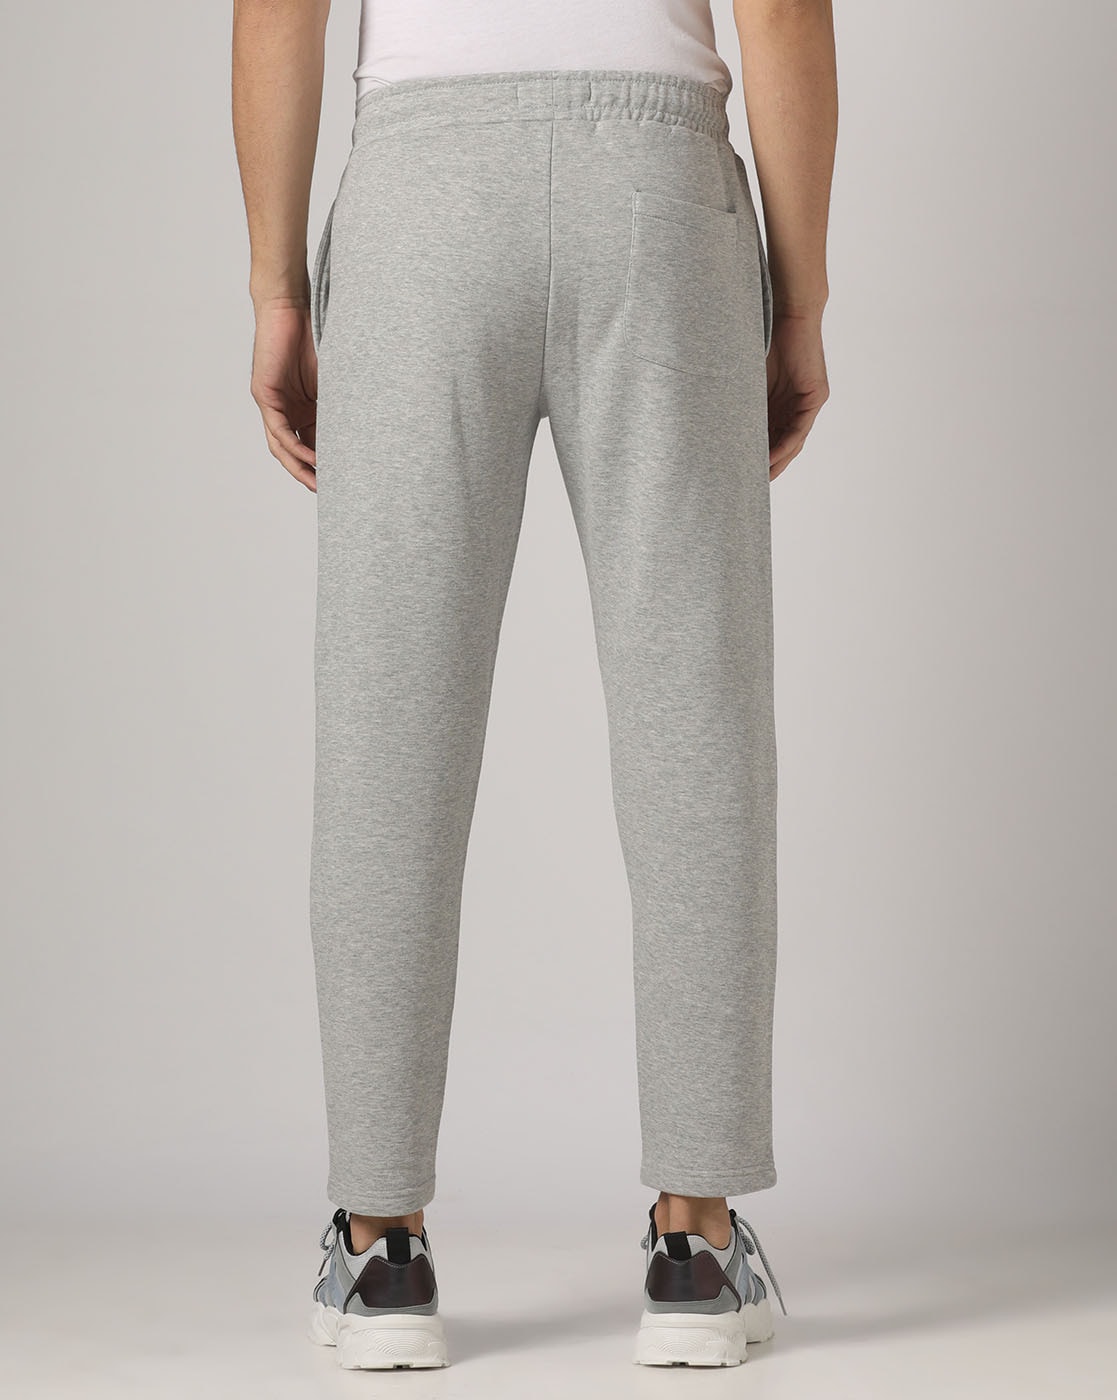 Buy Grey Track Pants for Men by Buda Jeans Co Online